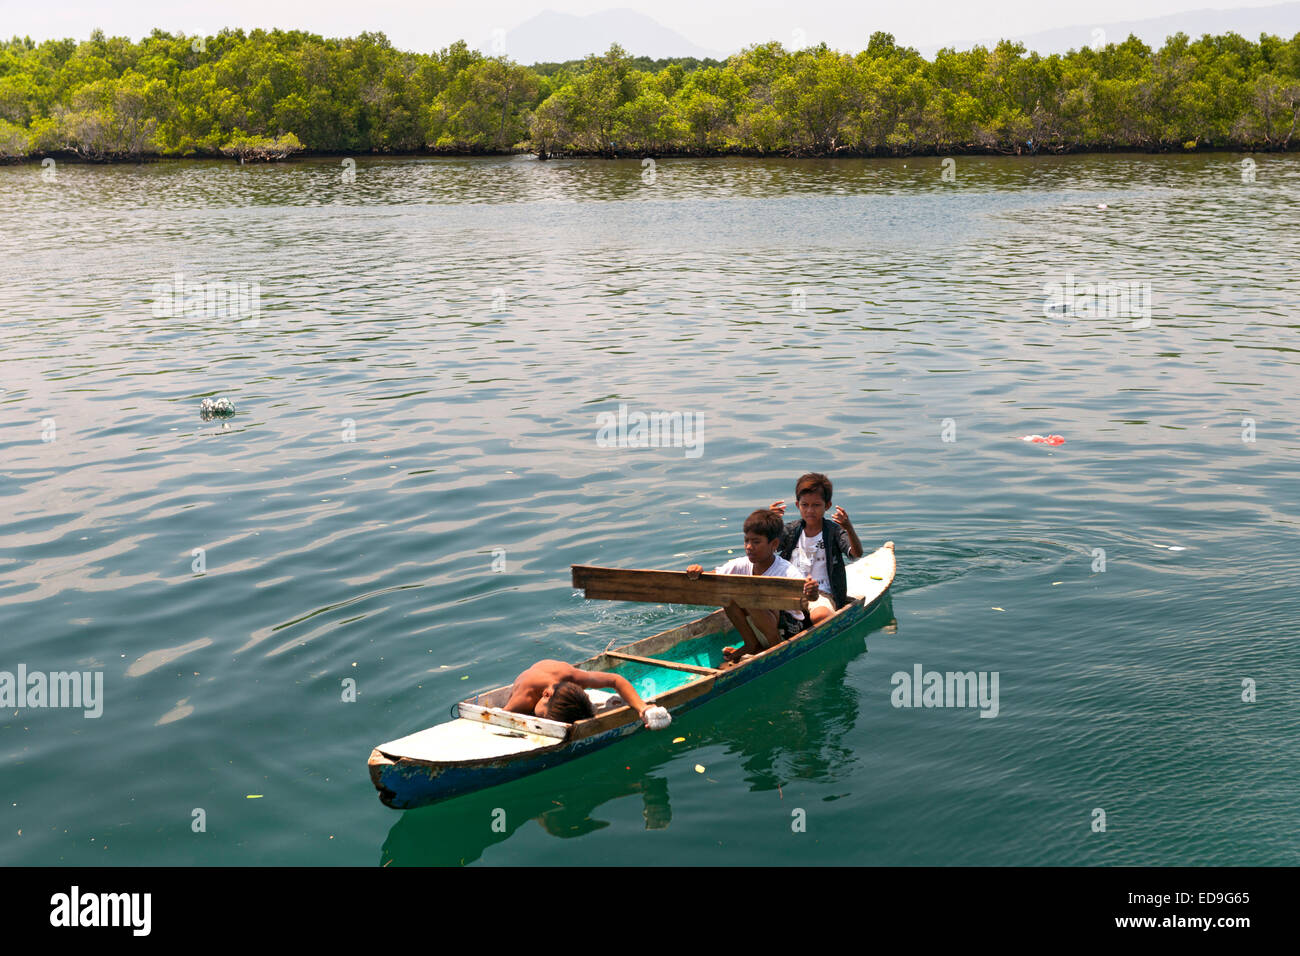 Indonesian children in a canoe in the waters of Wuring fishing village near Maumere on Flores island, Indonesia. Stock Photo